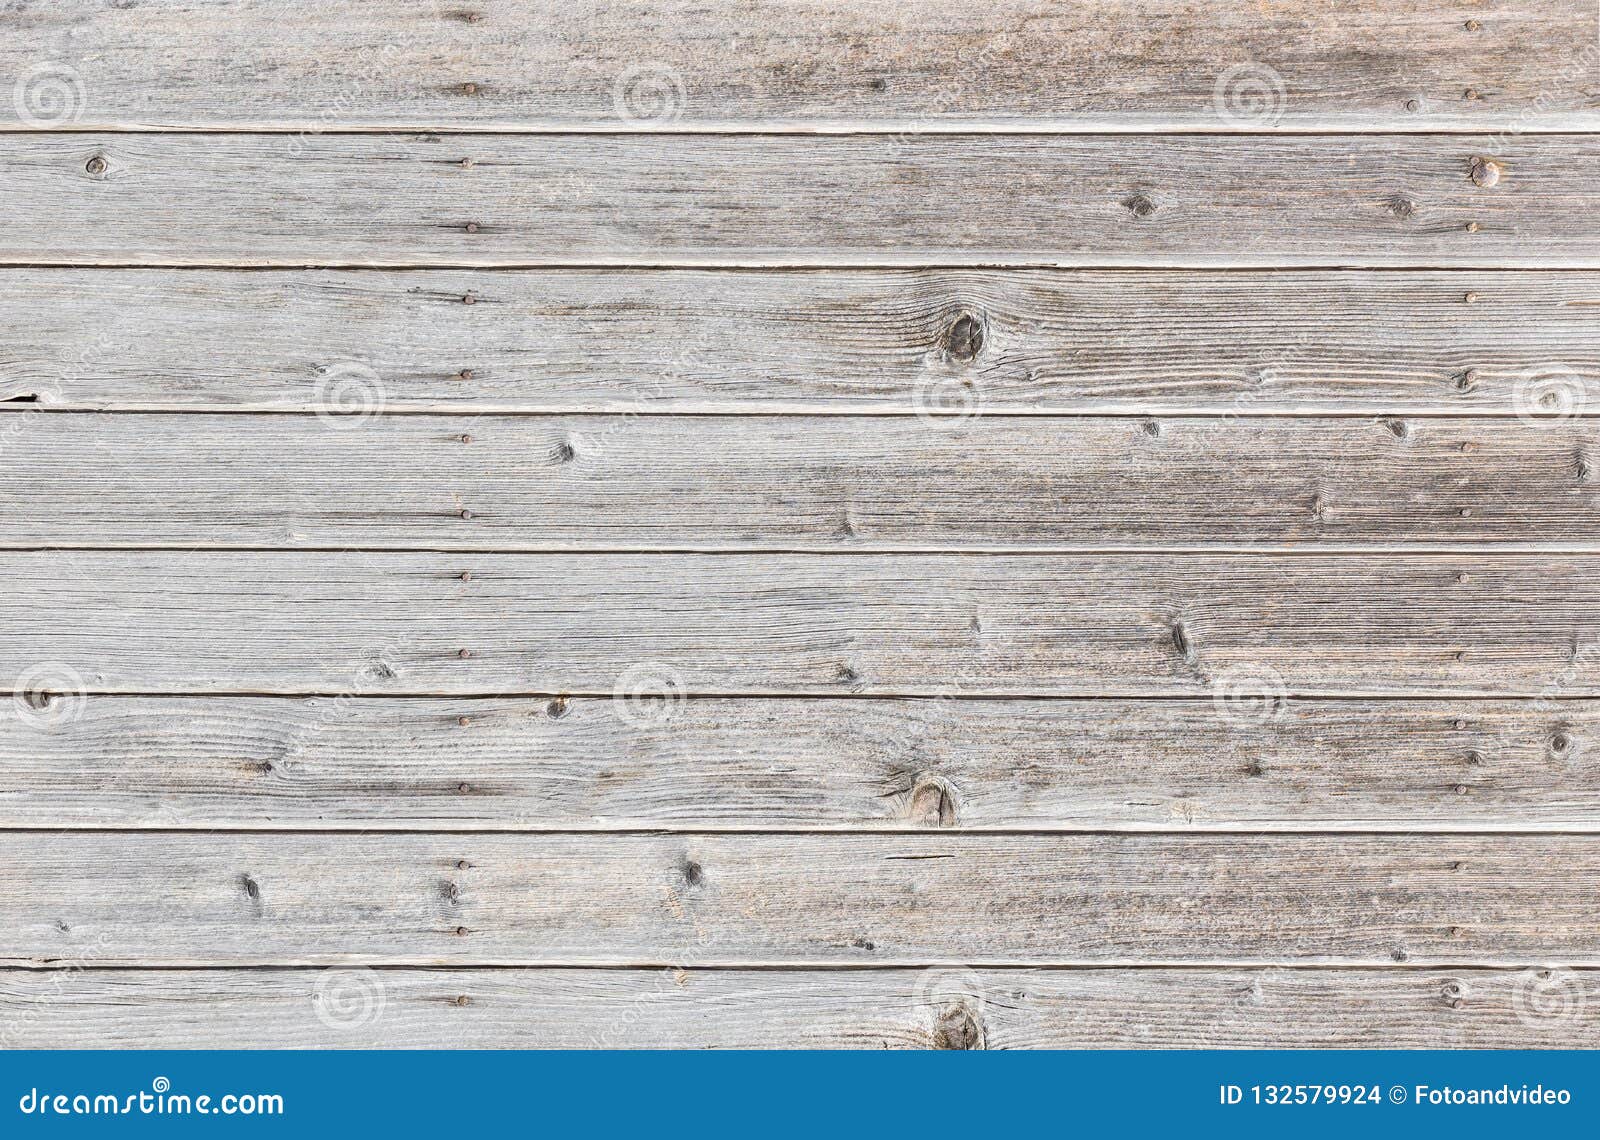 natural gray weathered old wood planks texture